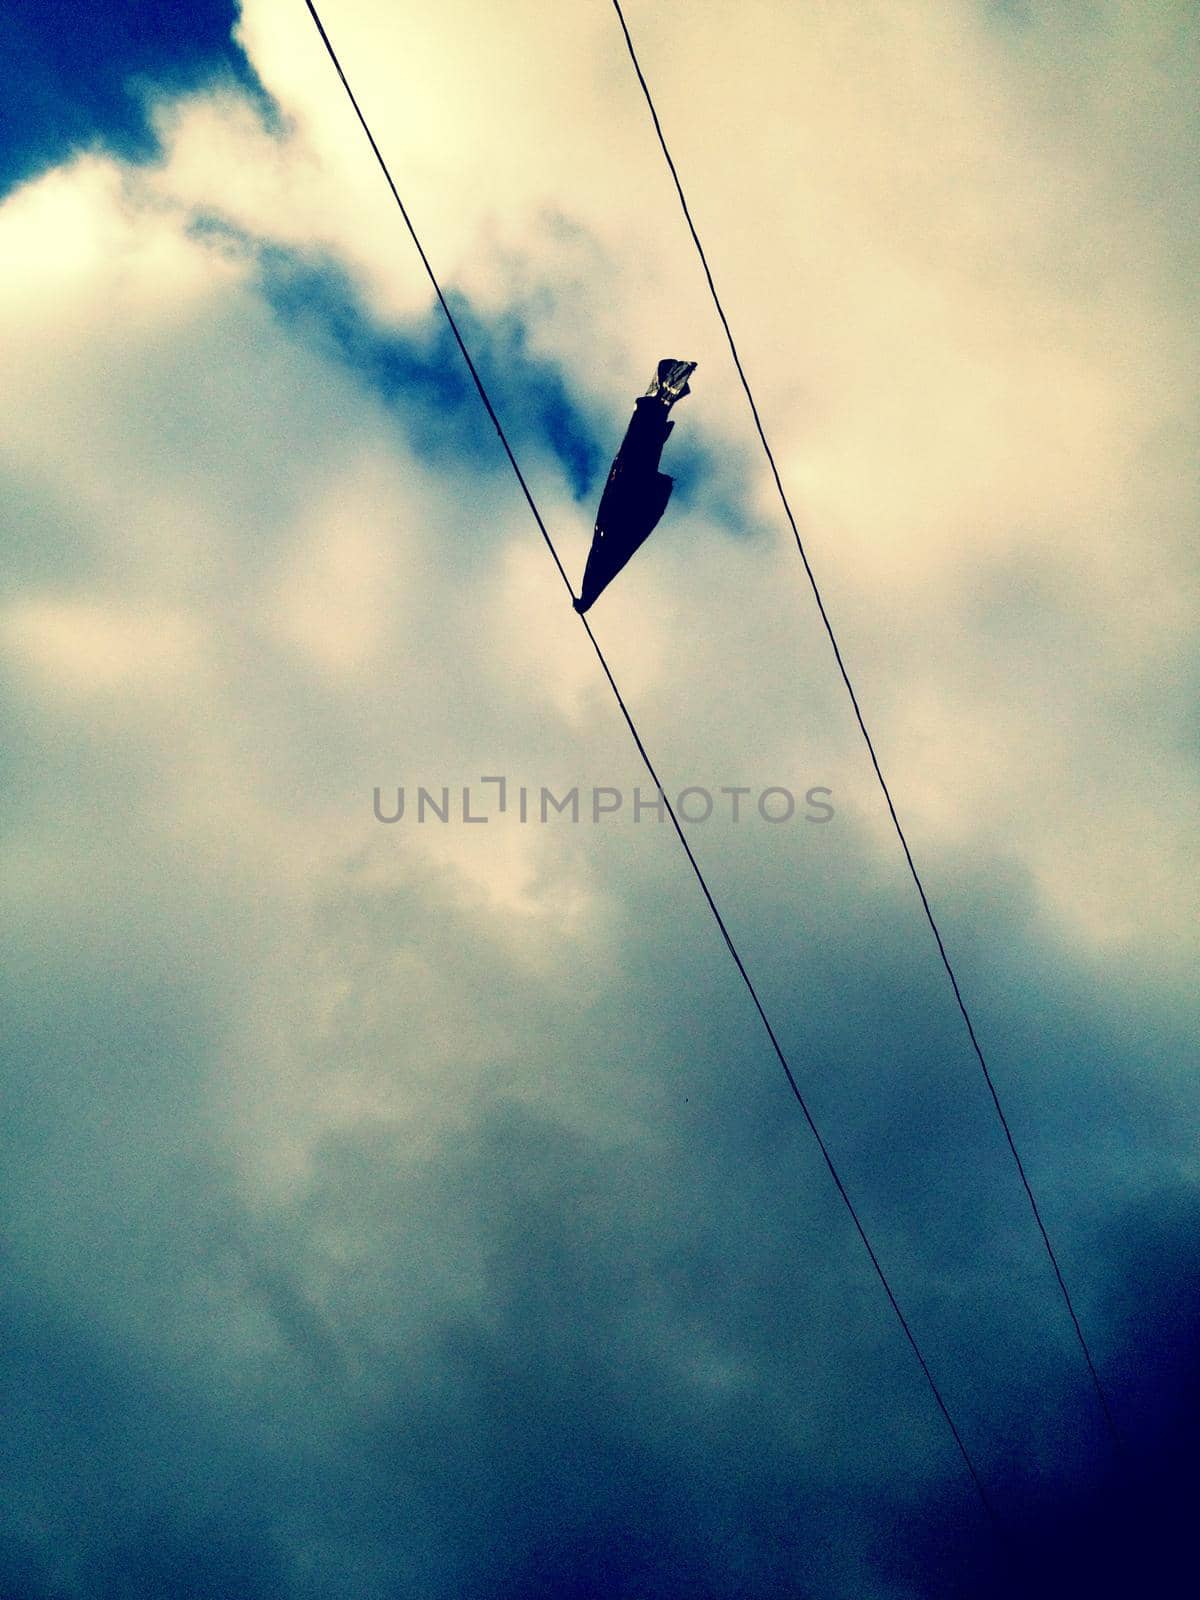 Strange object attached to a phone line against a cloudy blue sky by njproductions